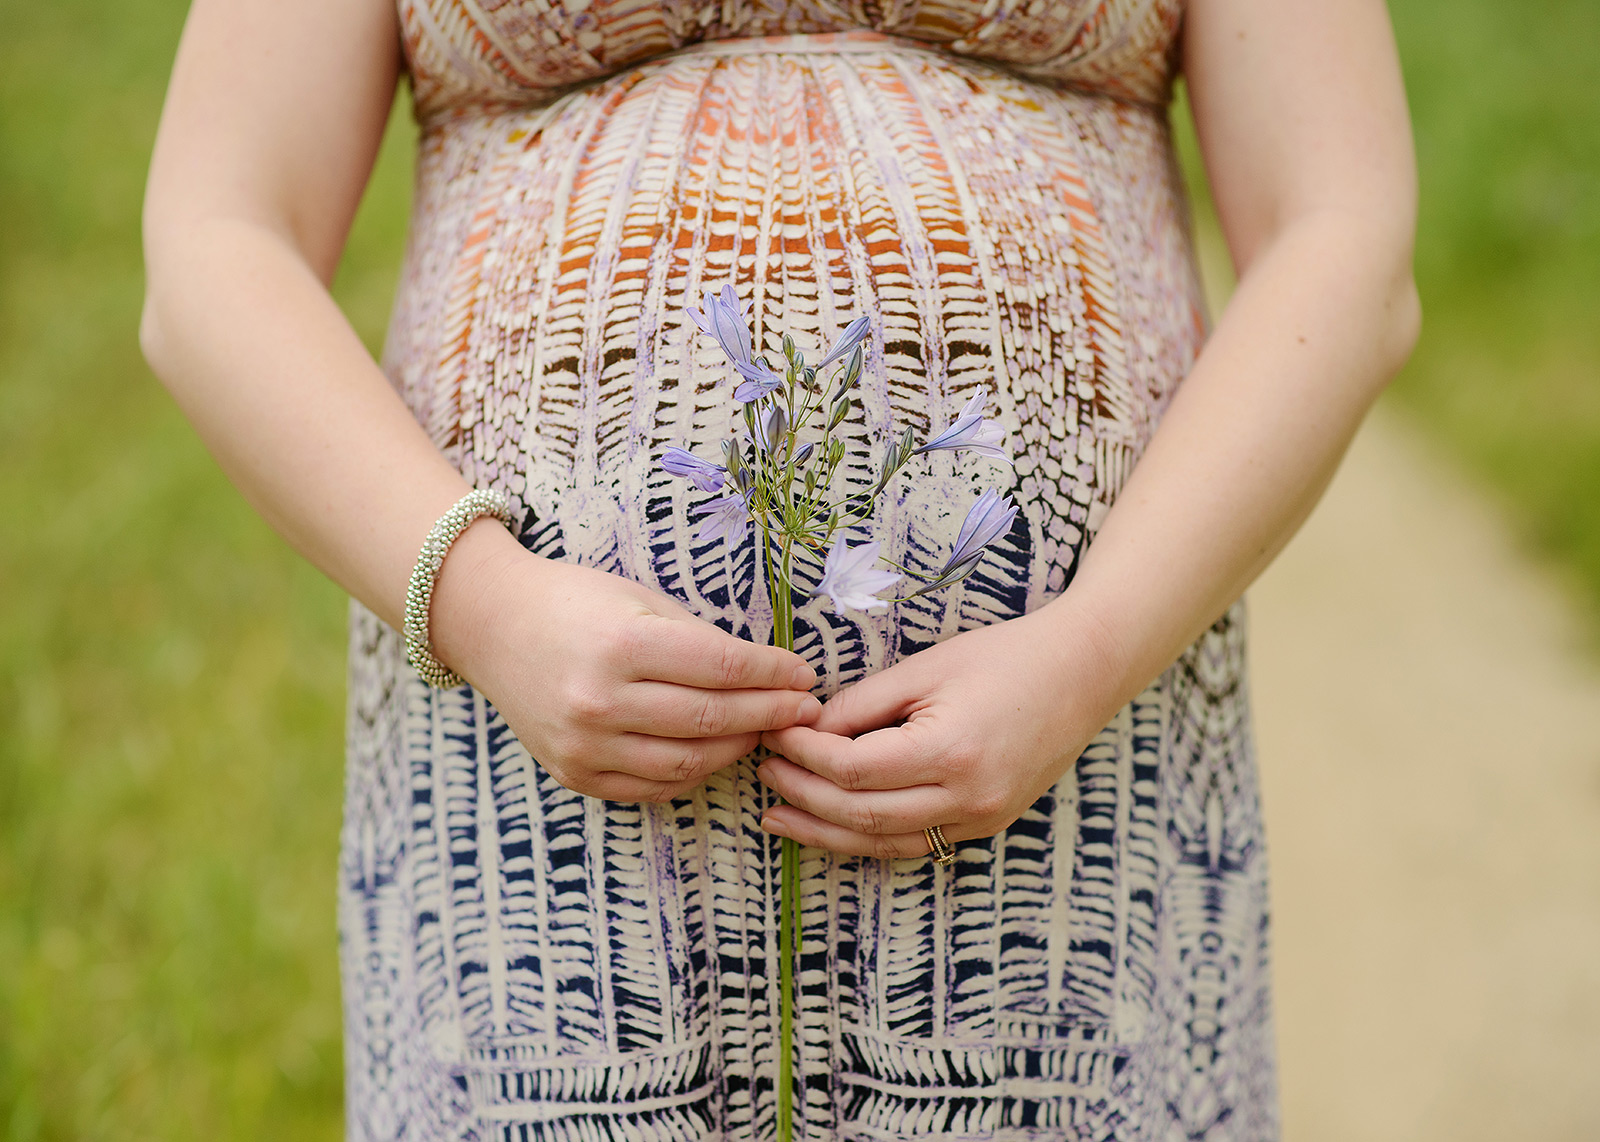 Colorful close-up of maternity bump holding Folsom wildflowers